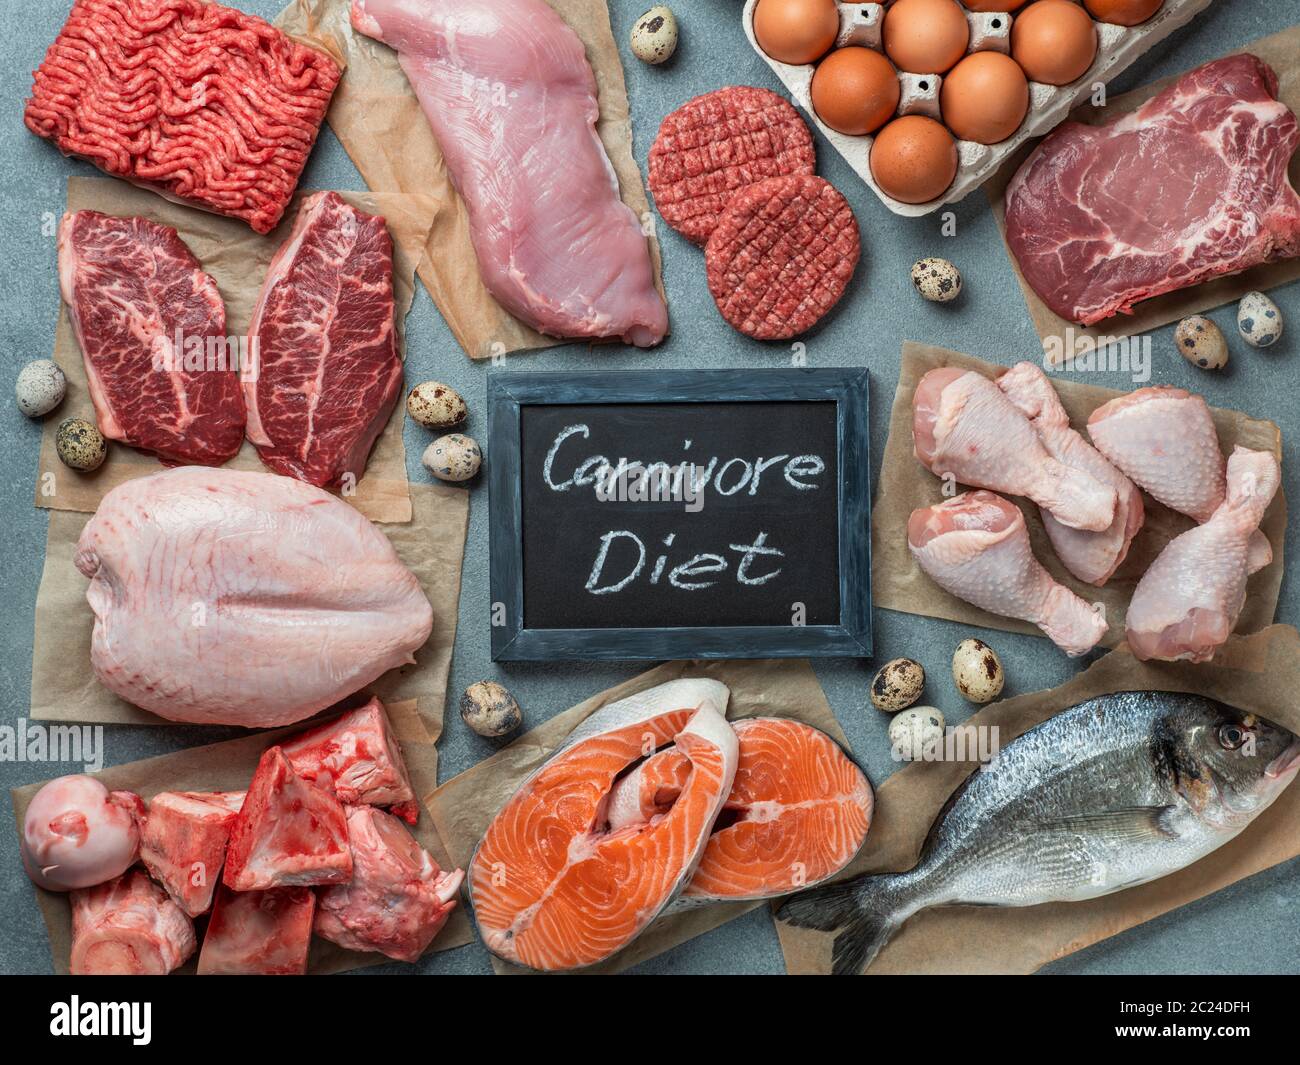 Carnivore diet concept. Raw ingredients for zero carb diet - meat, poultry, fish, seafood, eggs, beef bones for bone broth and words Carnivore Diet on Stock Photo